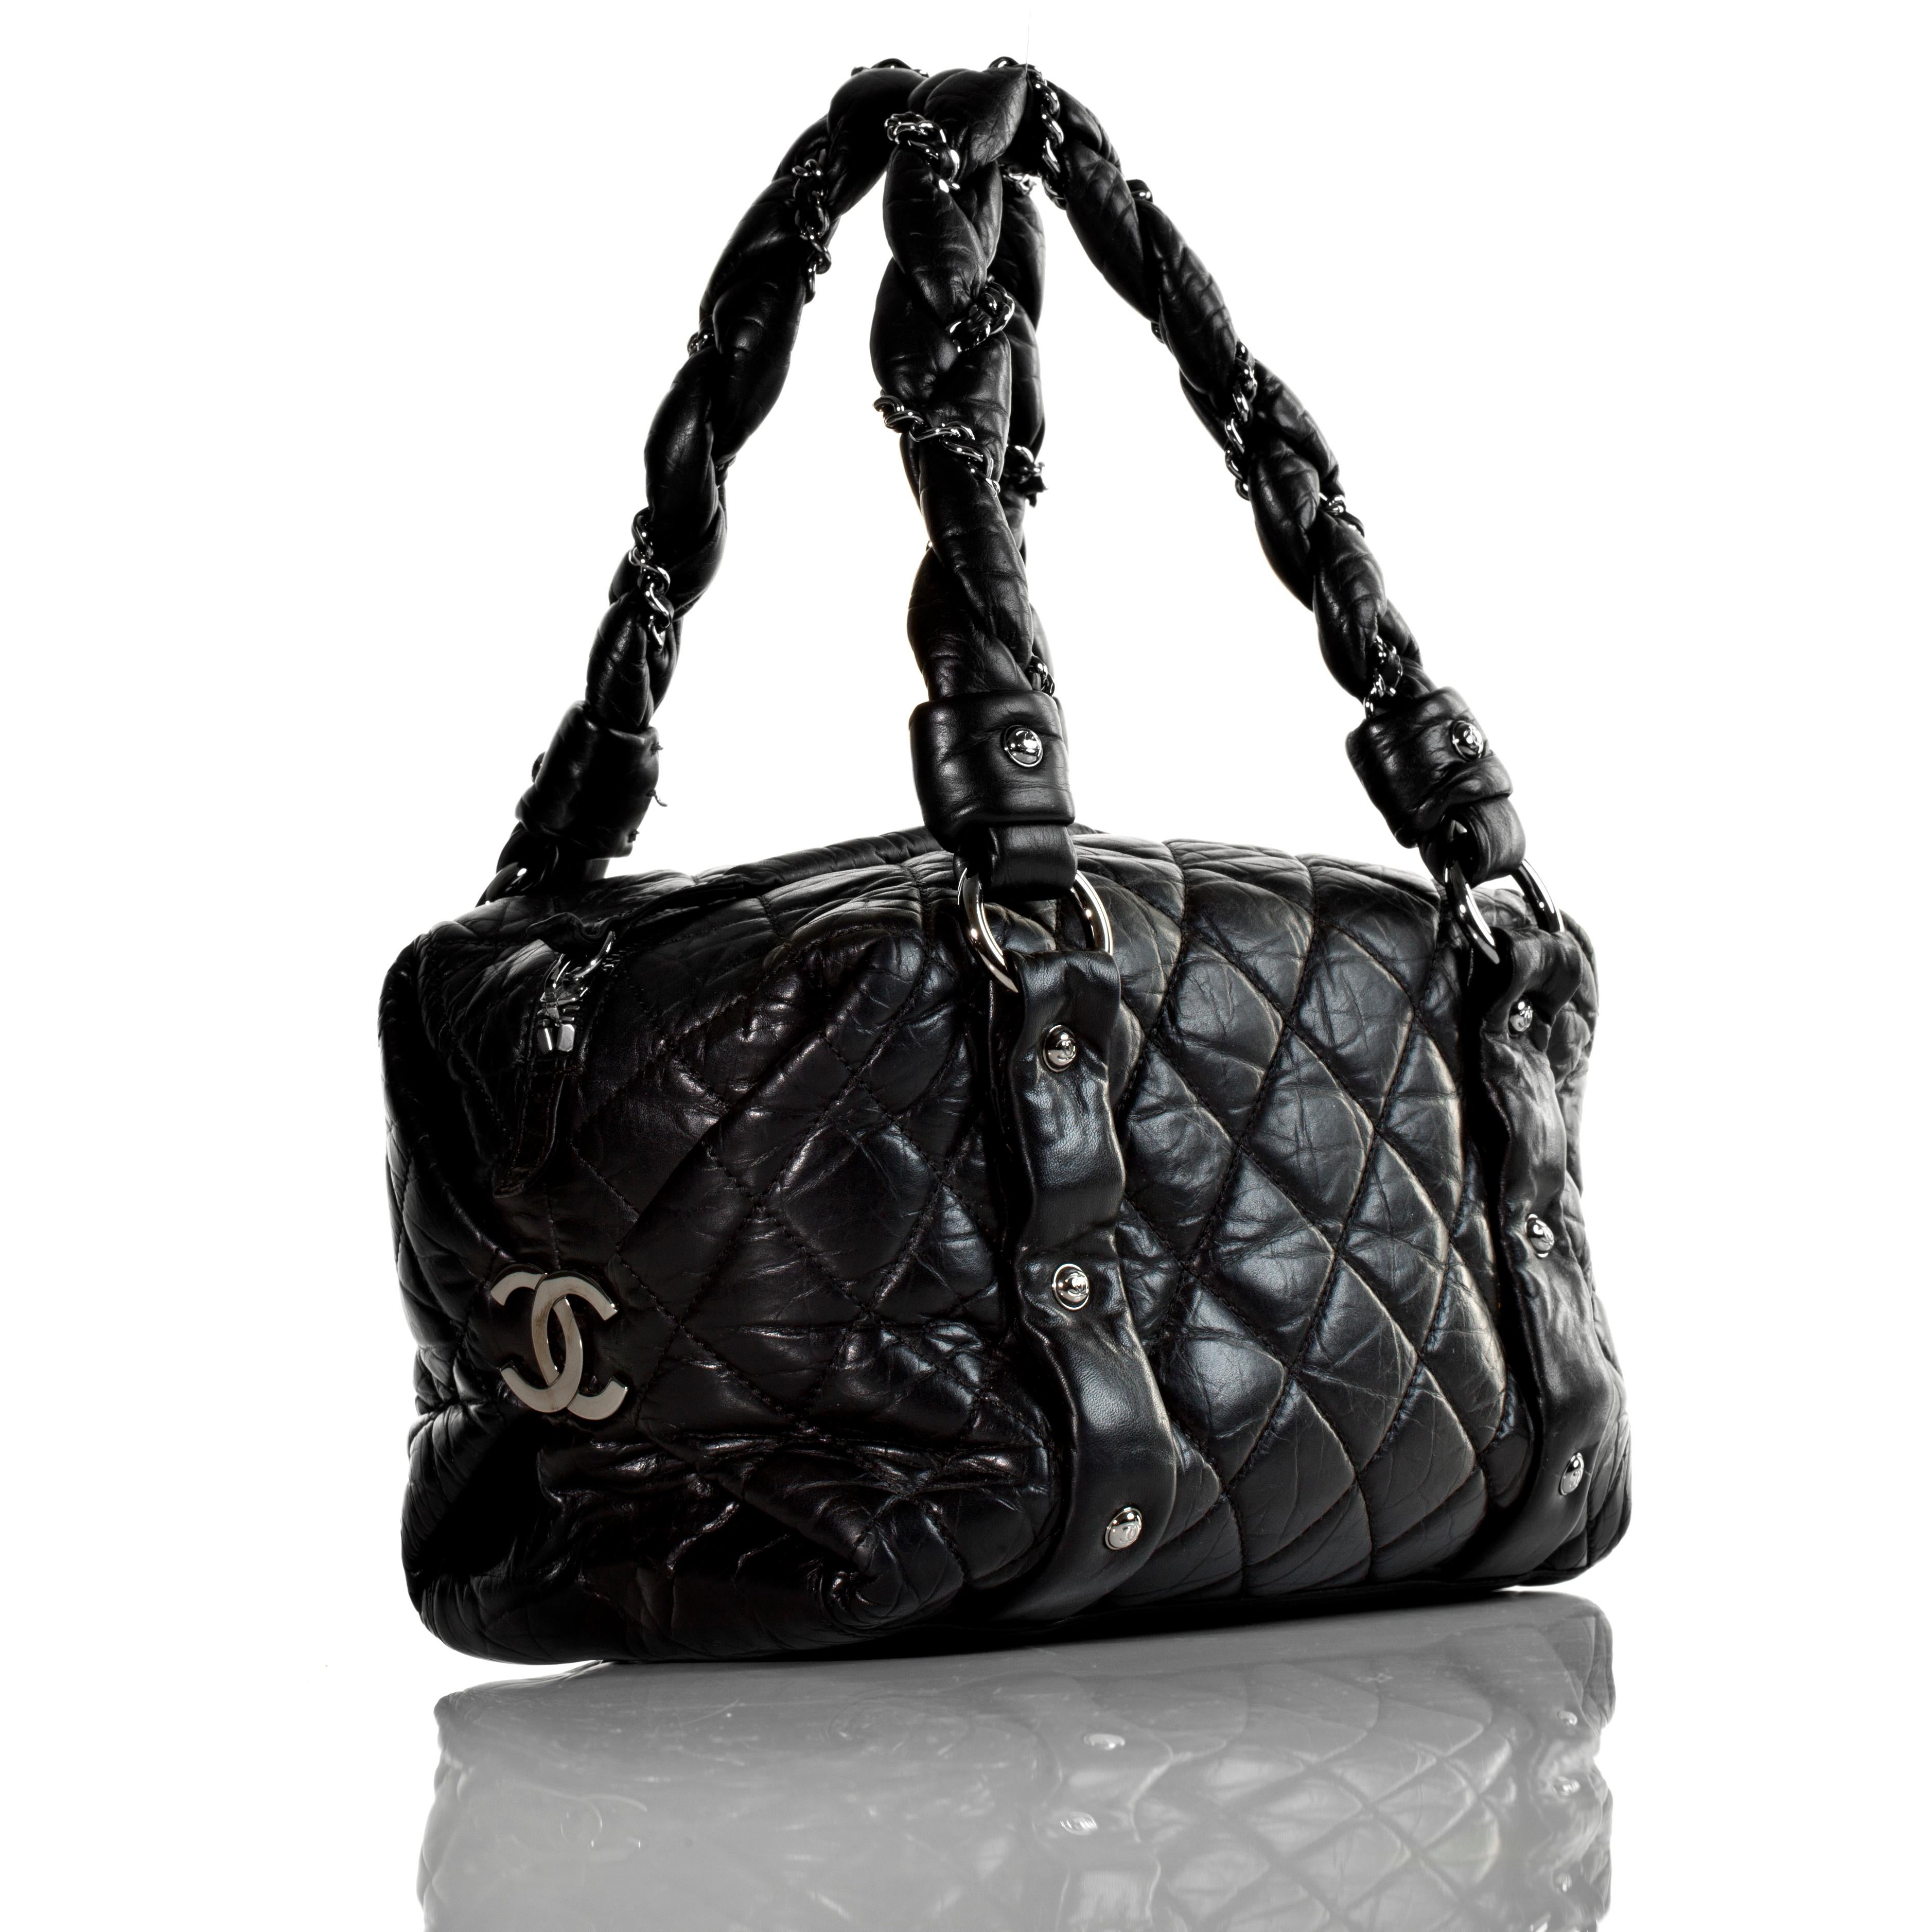 Chanel 2006 Distressed Soft Bubble Calfskin Small Mini Bowler Tote 

Small size Chanel distressed calfskin black bowler with interwoven braided straps

2006 {VINTAGE 16 Years}
Silver hardware
Zipper closure
Interior graffiti lining
Interior centered